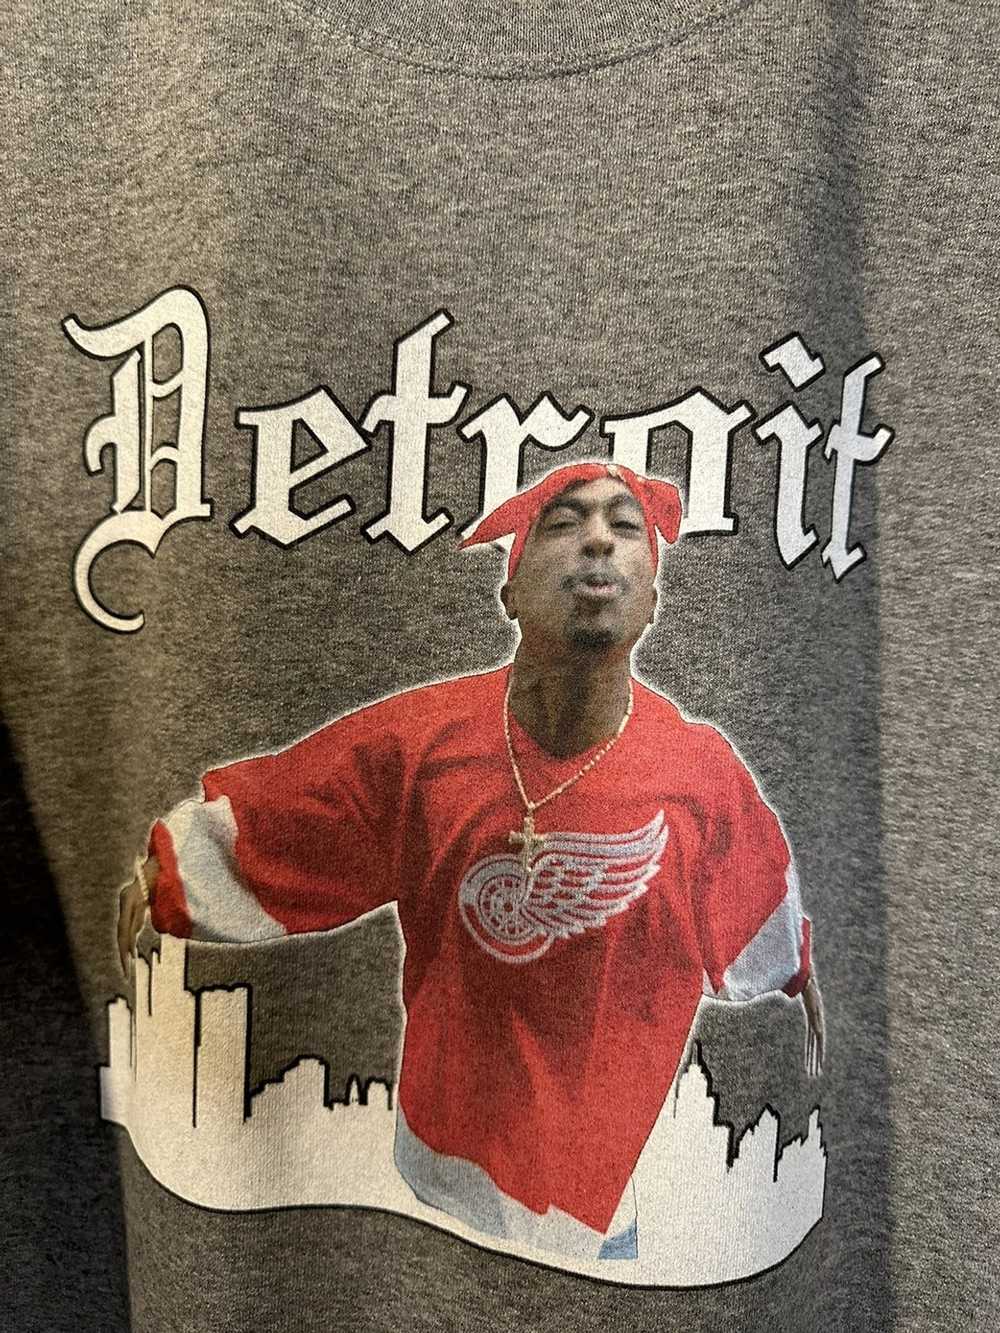 TUPAC SHAKUR Detroit Red Wings Graphic T-Shirt - SIZE Medium - EXTREMELY  RARE!